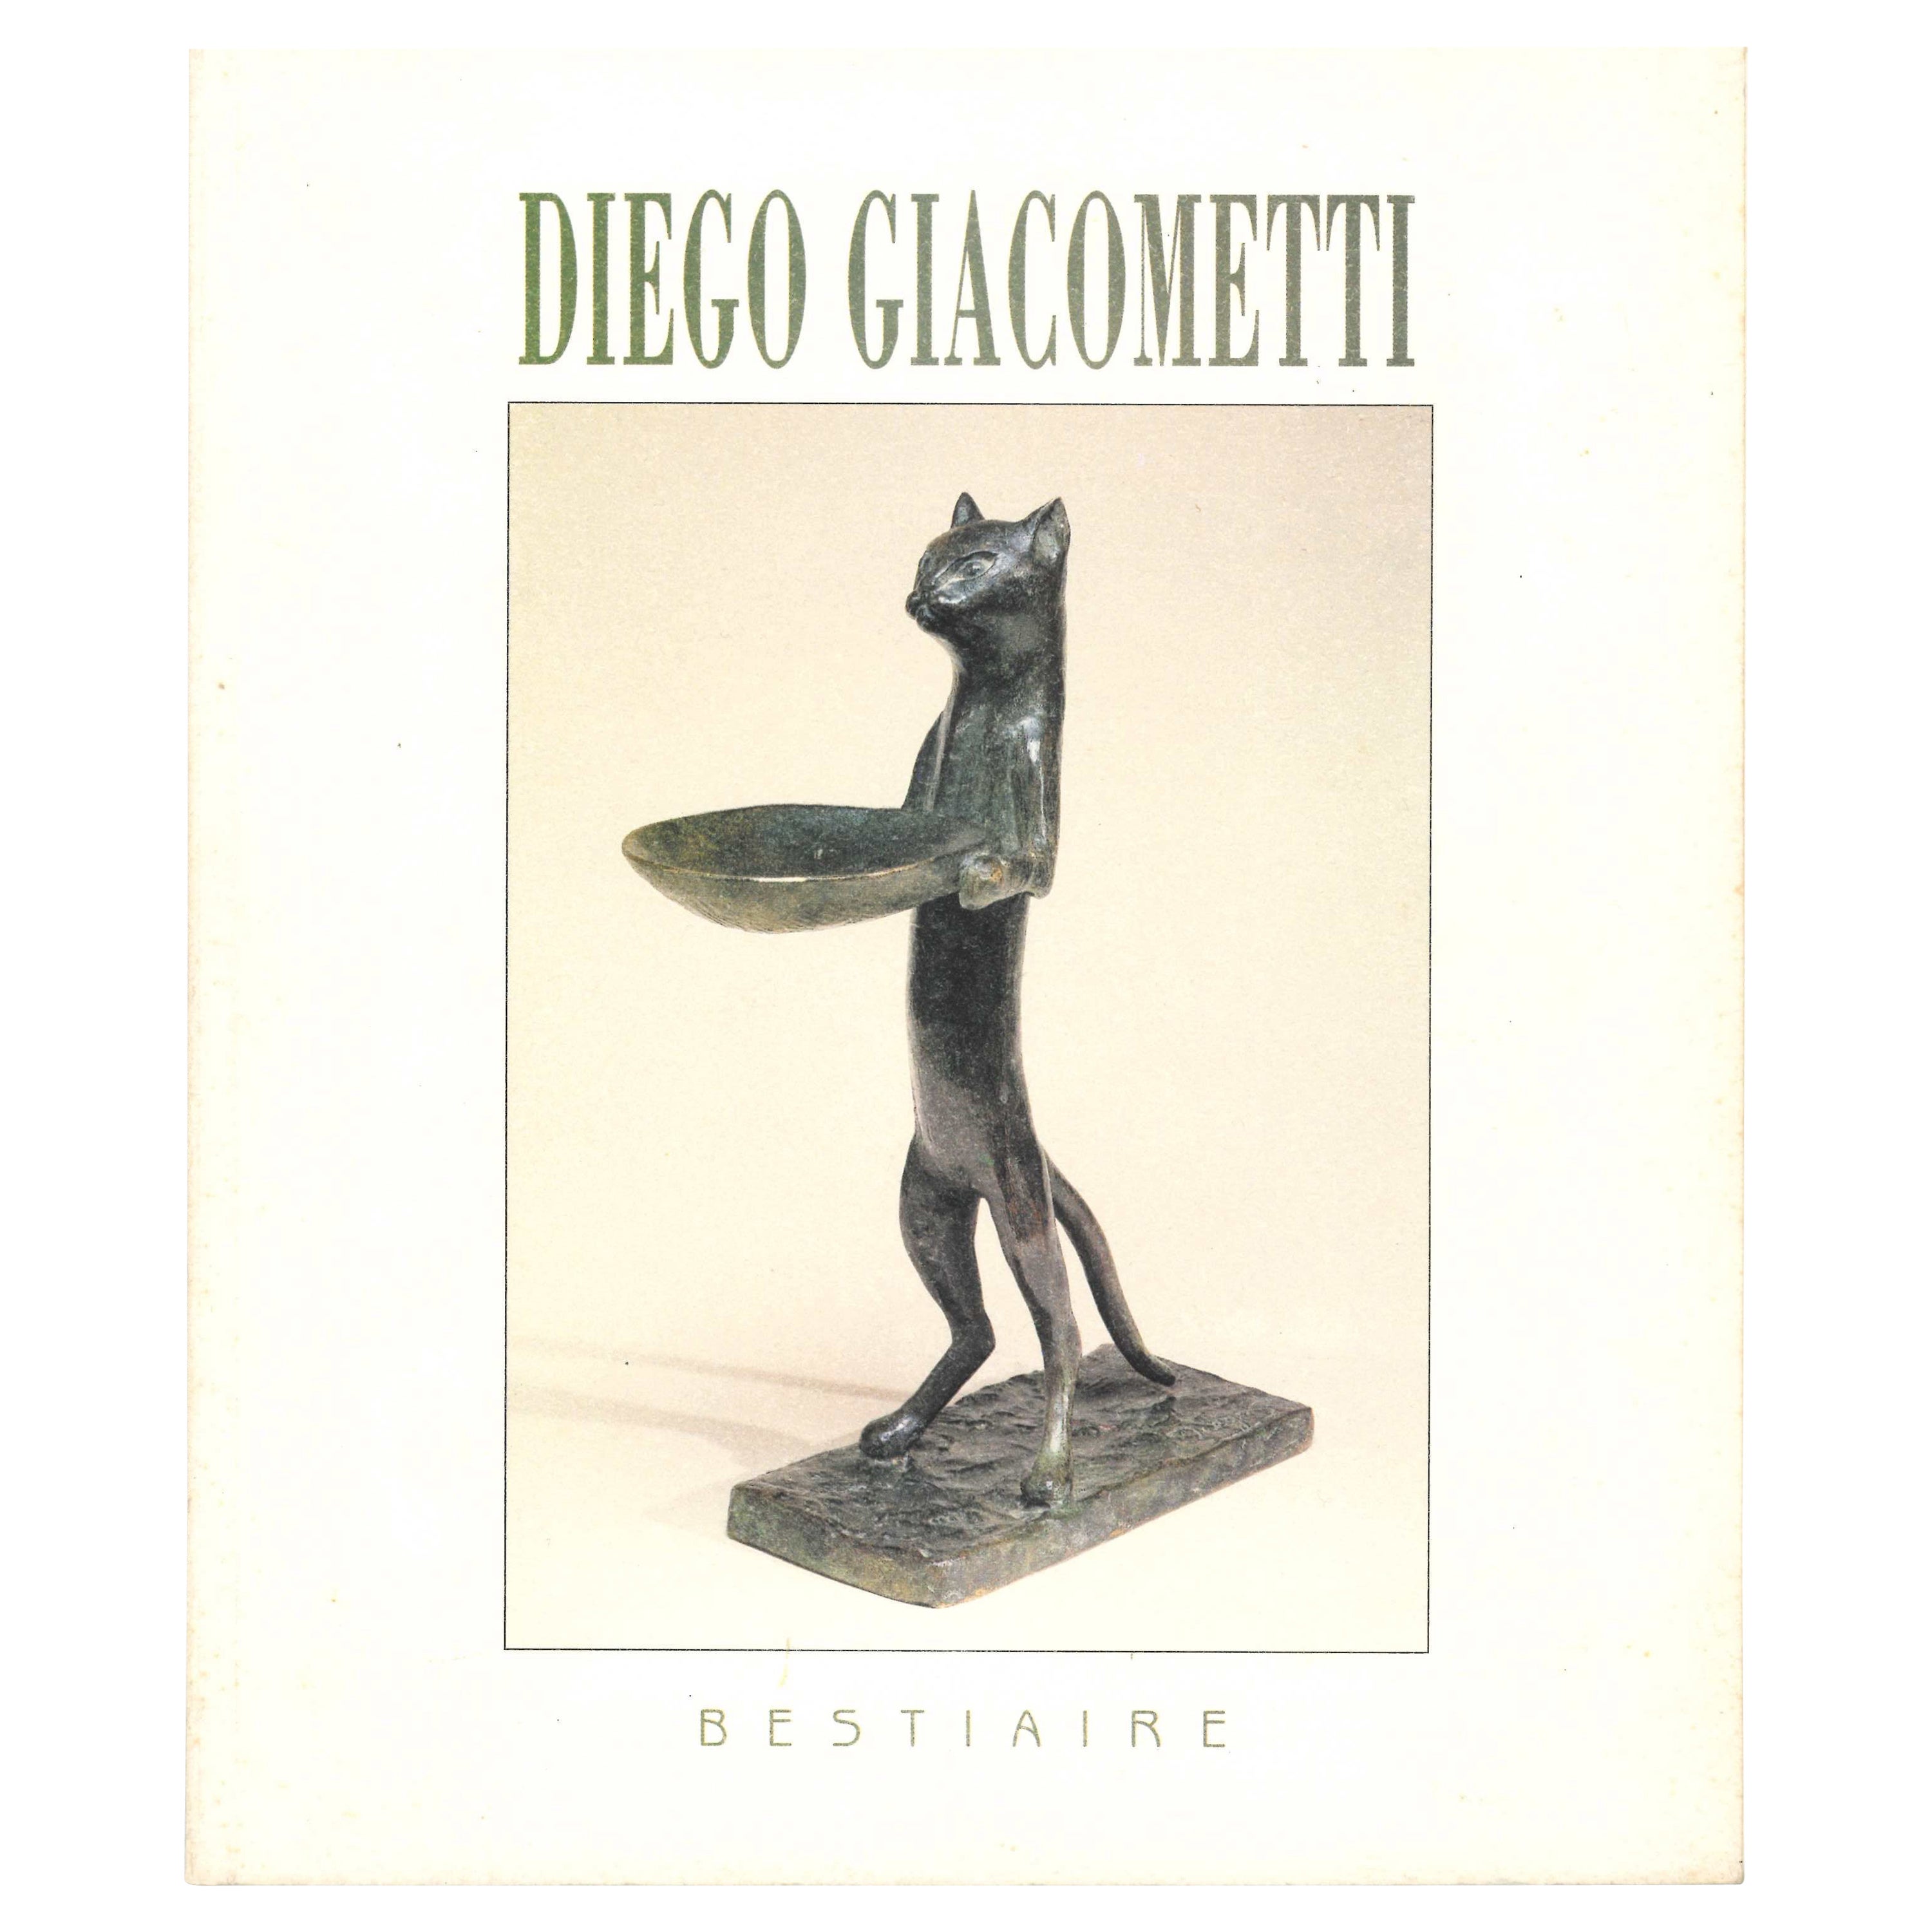 DIEGO GIACOMETTI, Bestiaire Catalogue, 20th Century Animal Sculpture